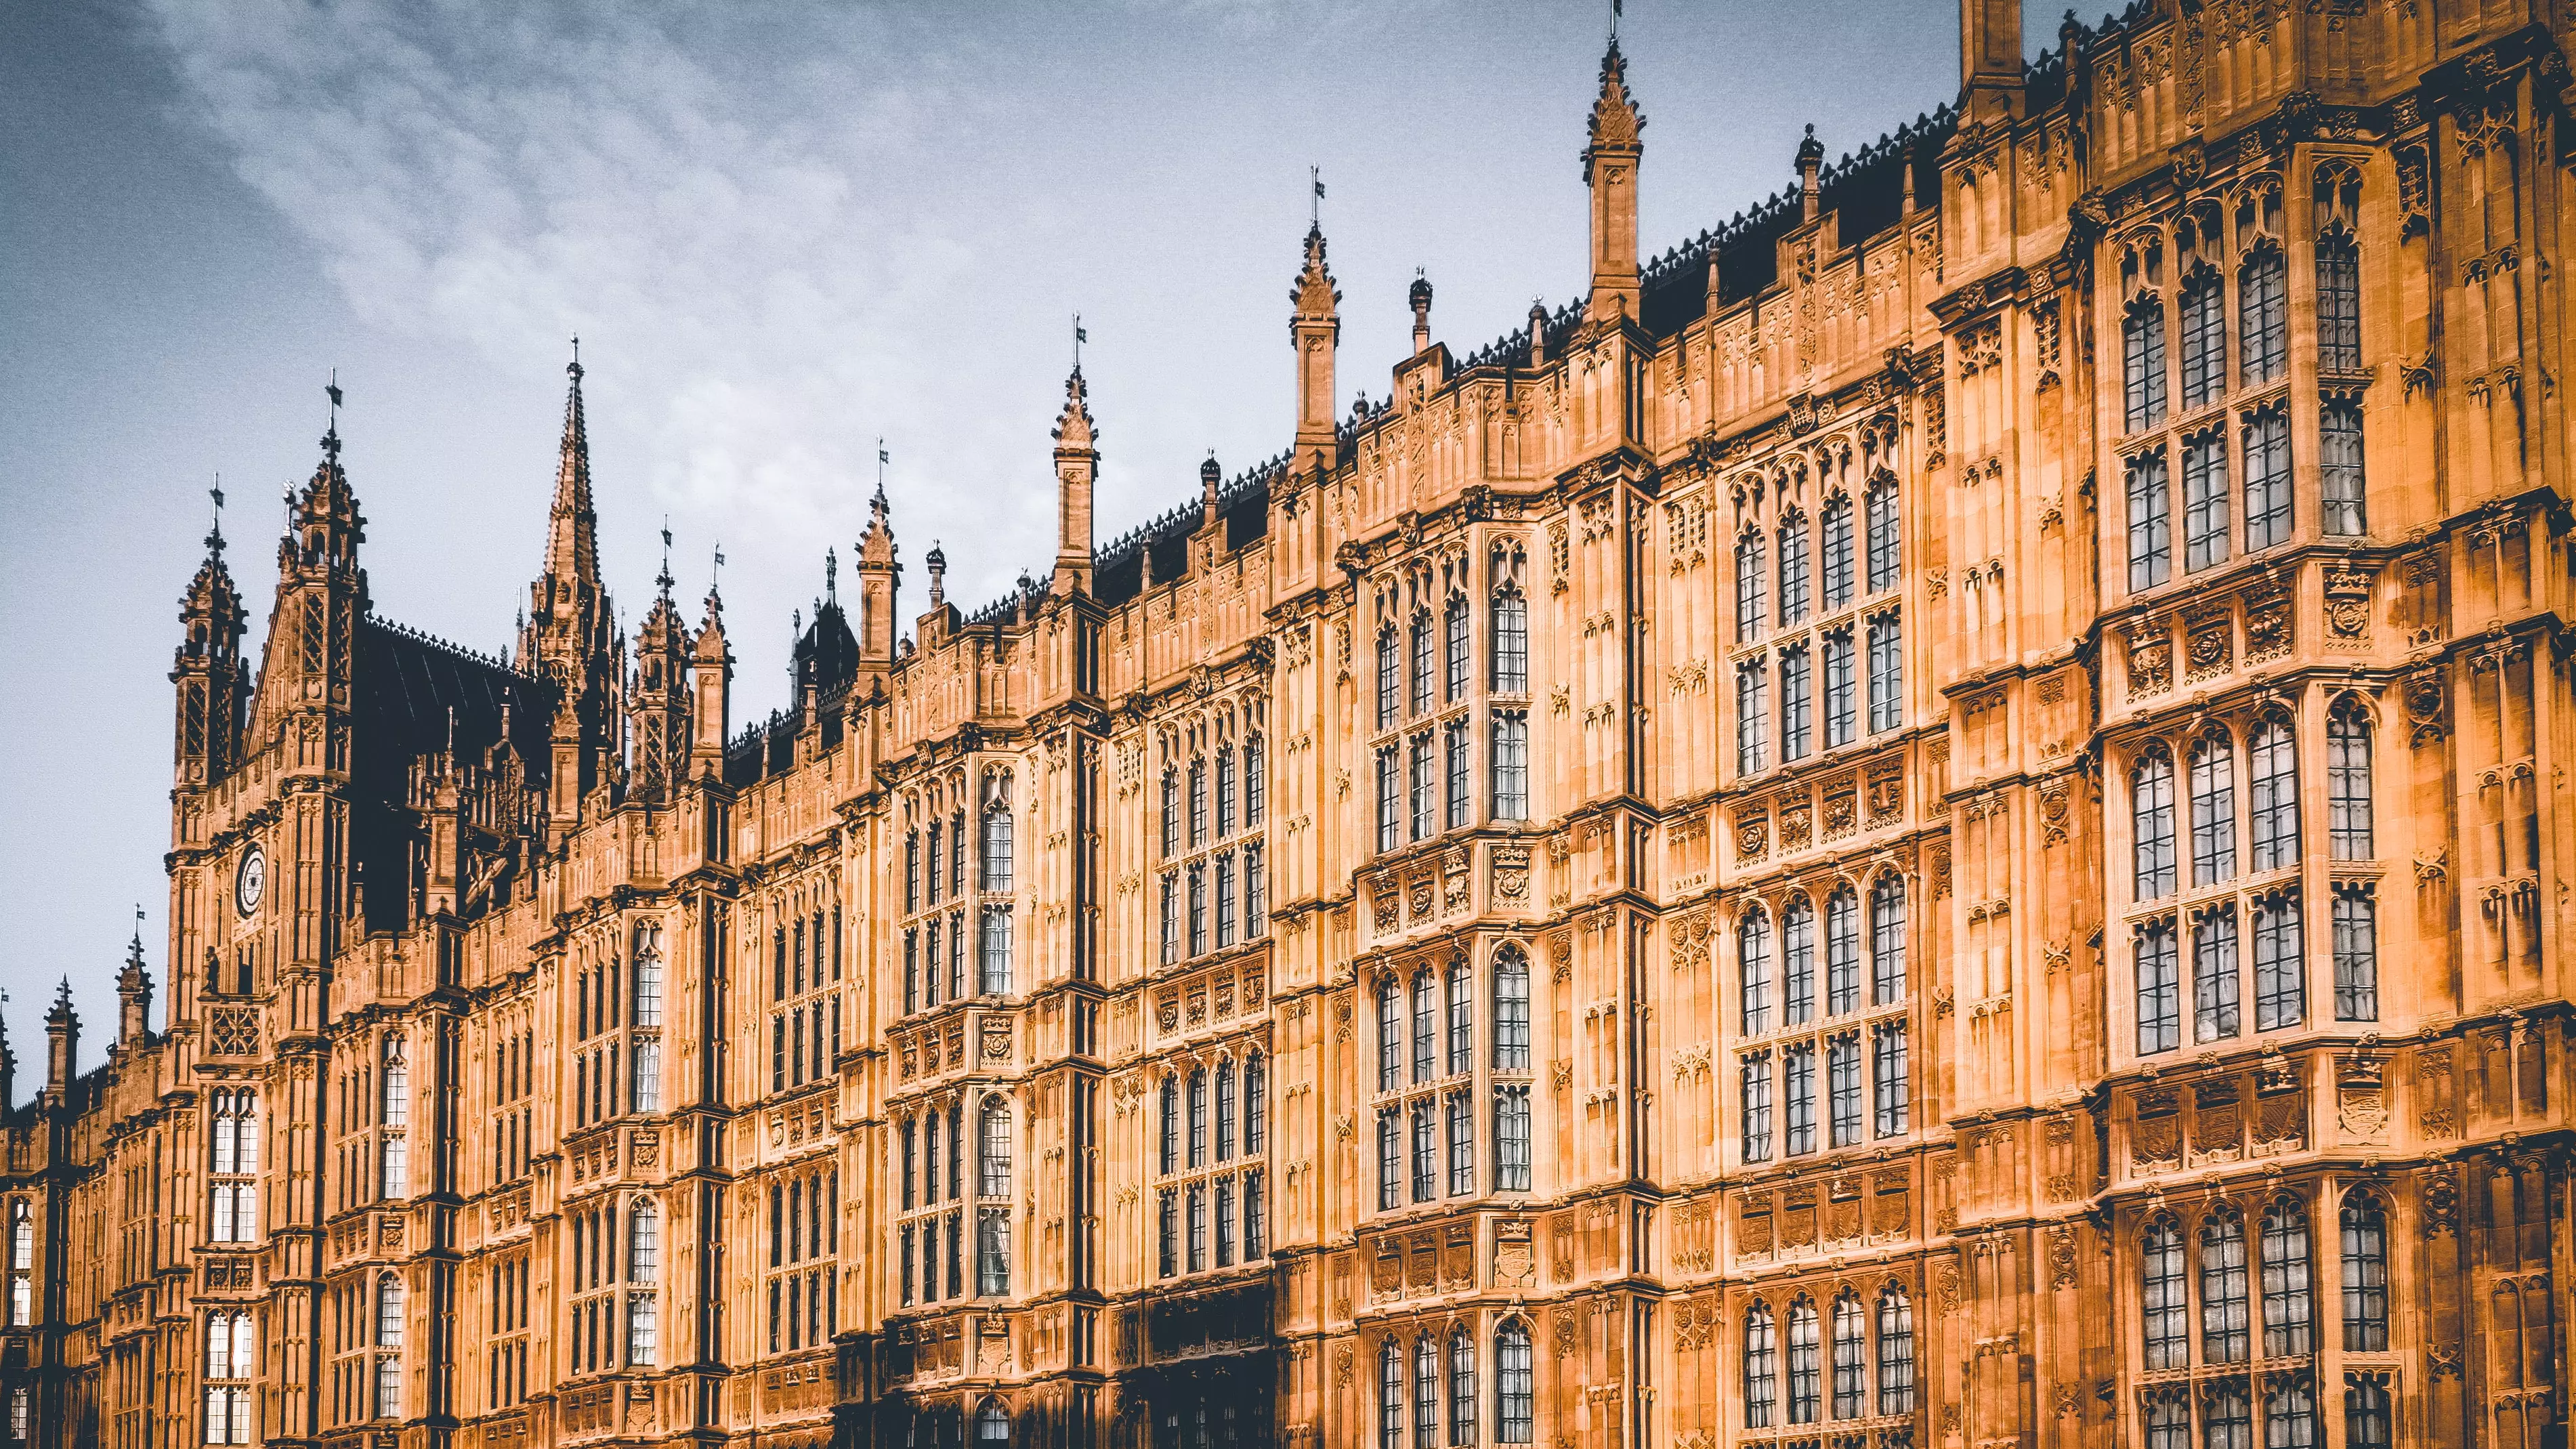 Traces Of Cocaine Found Throughout Houses Of Parliament